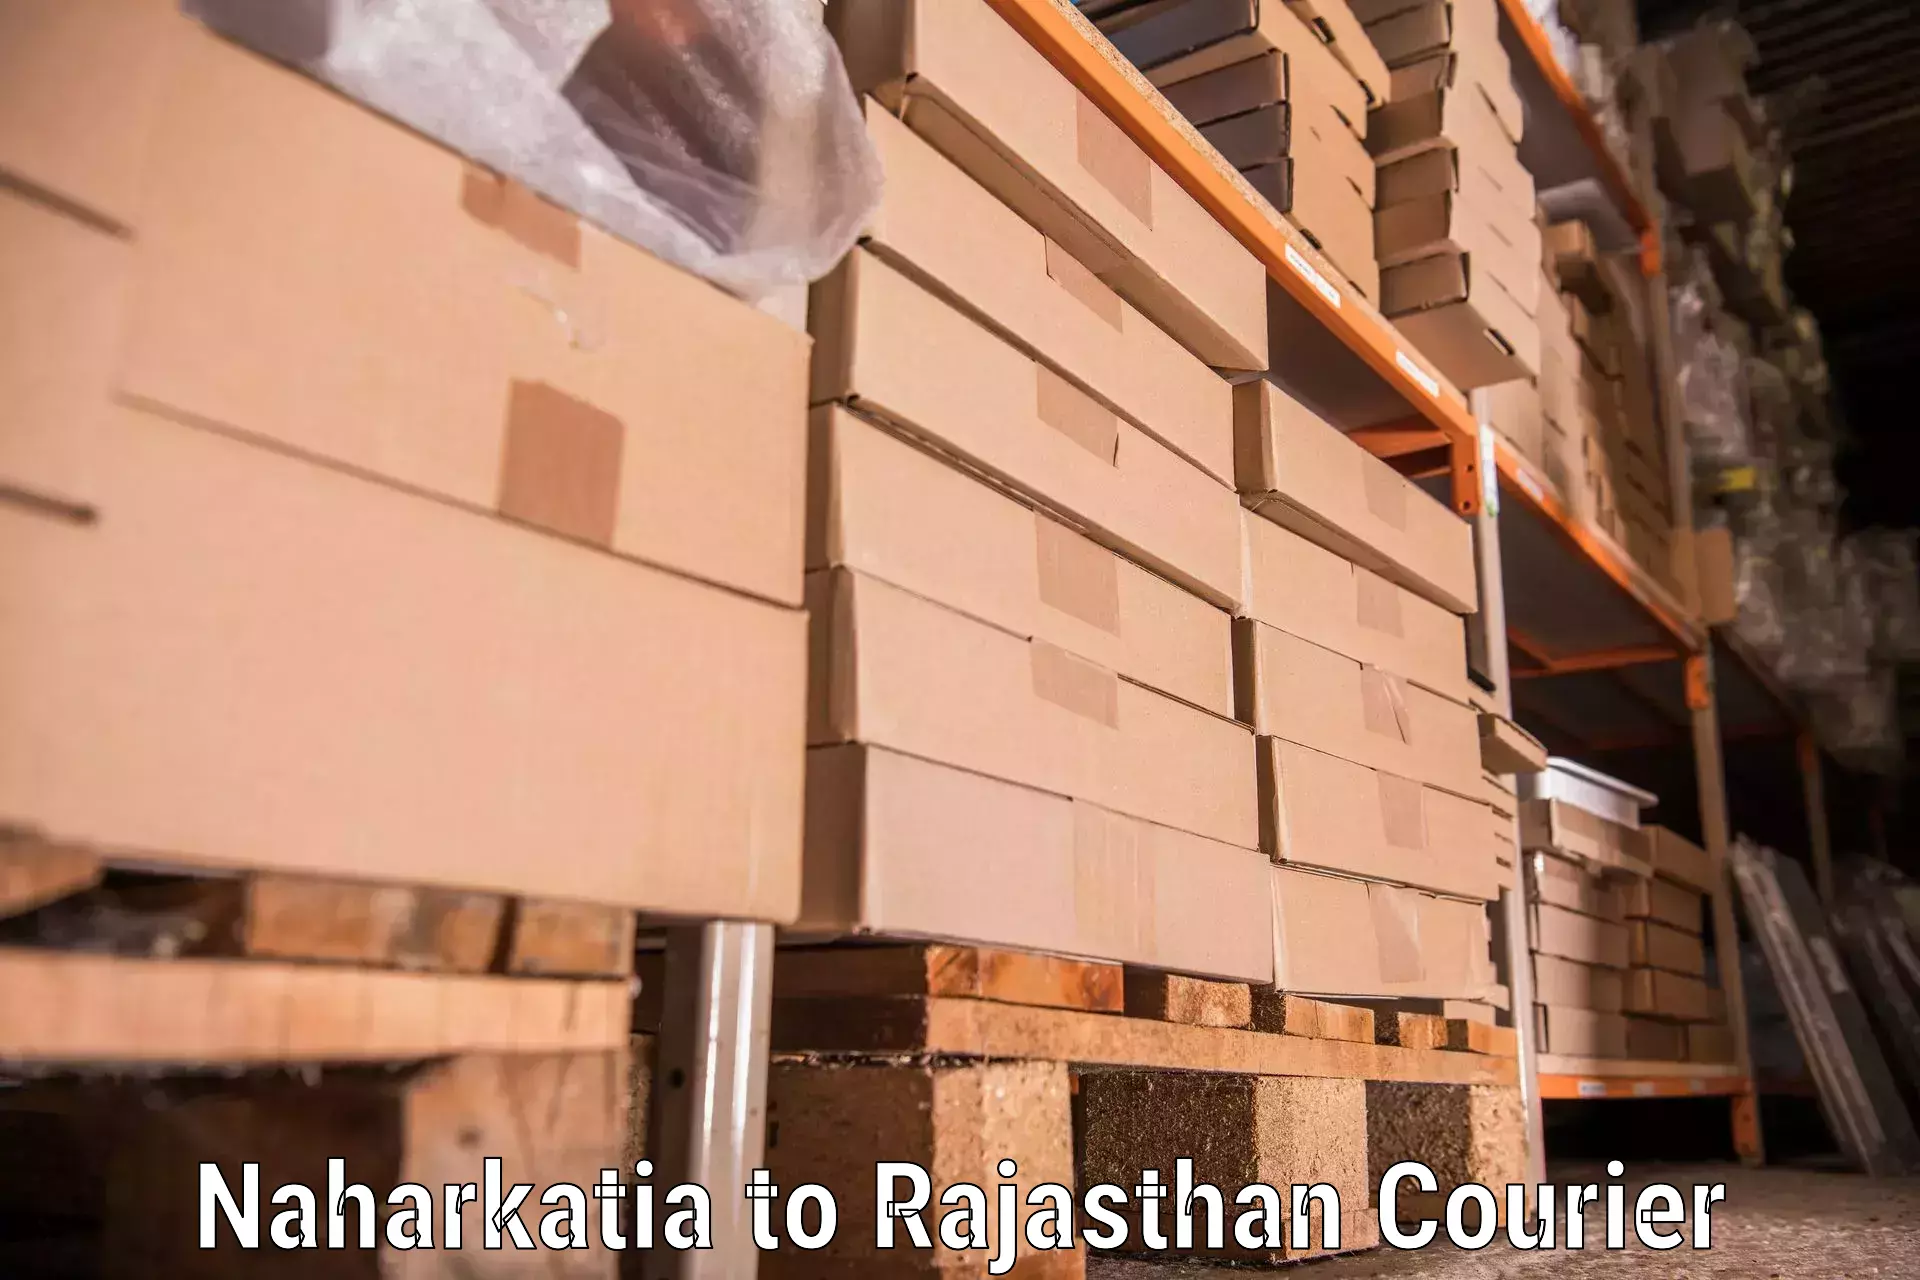 Quality relocation assistance in Naharkatia to Abu Road